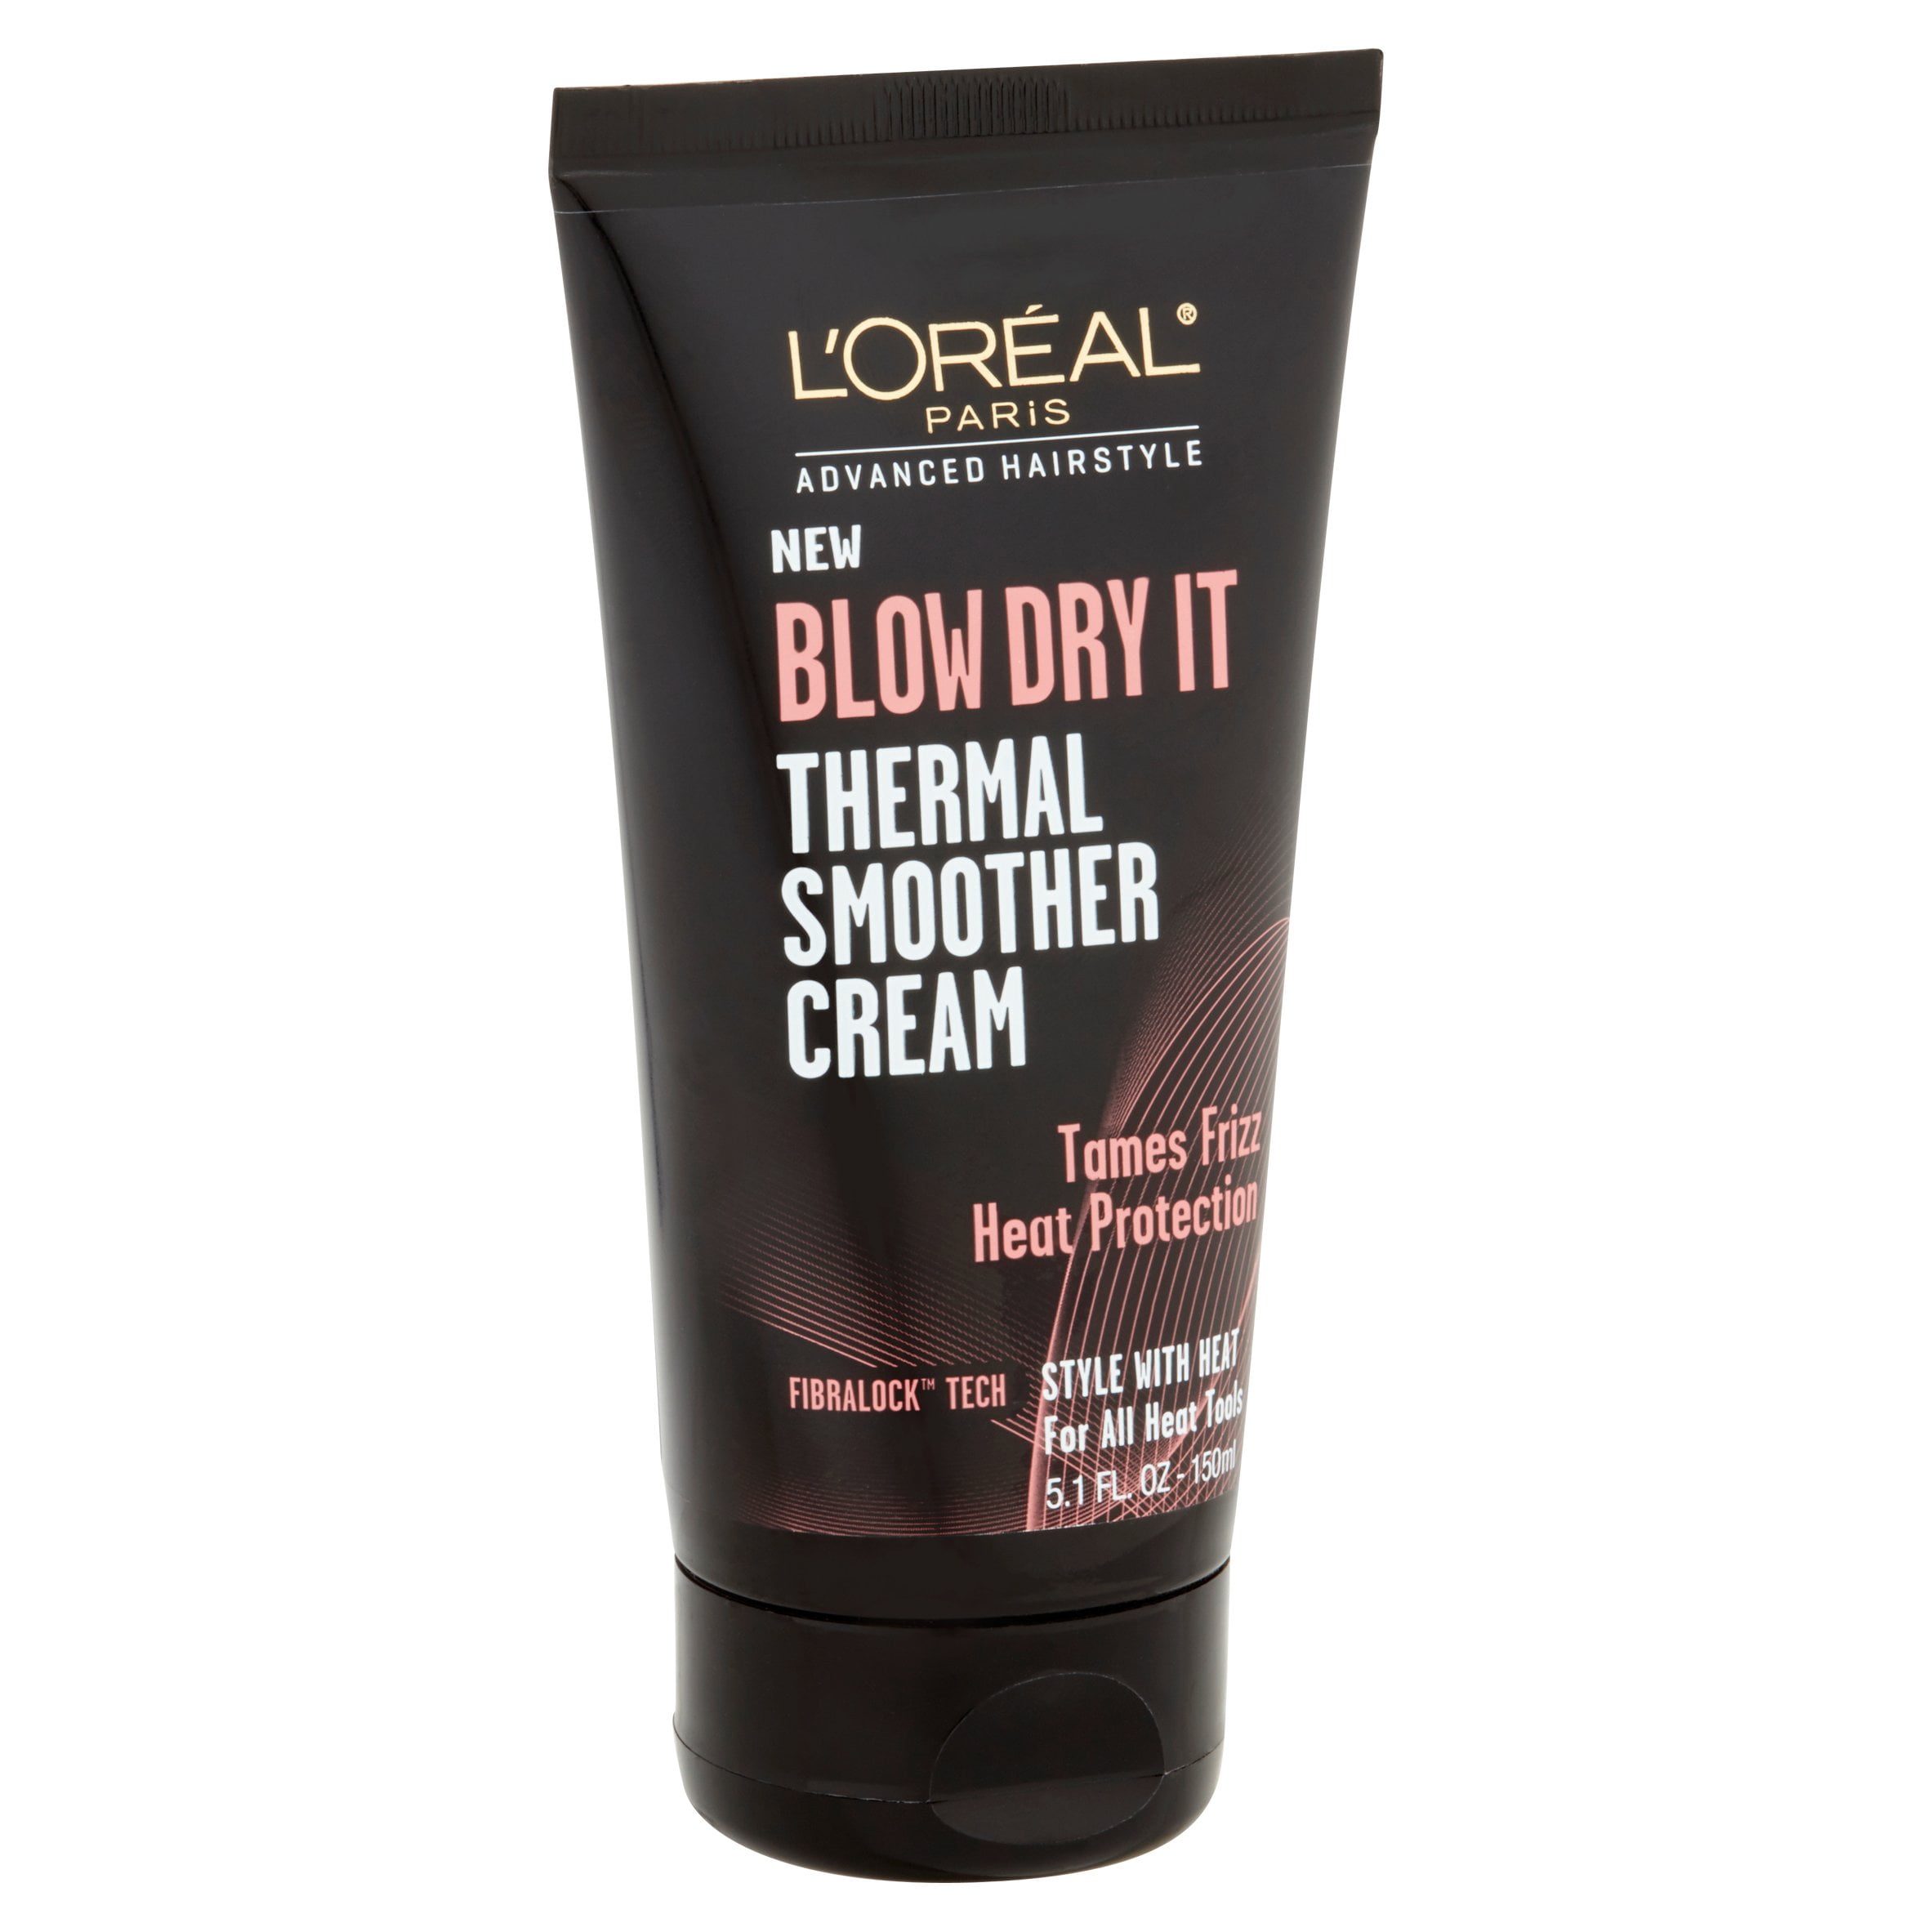 L'Oreal Paris Advanced Hairstyle Blow Dry It Heat Protection Tames frizz +  heat protection, Fibralock tech Hair Styling Cream,  fl oz 